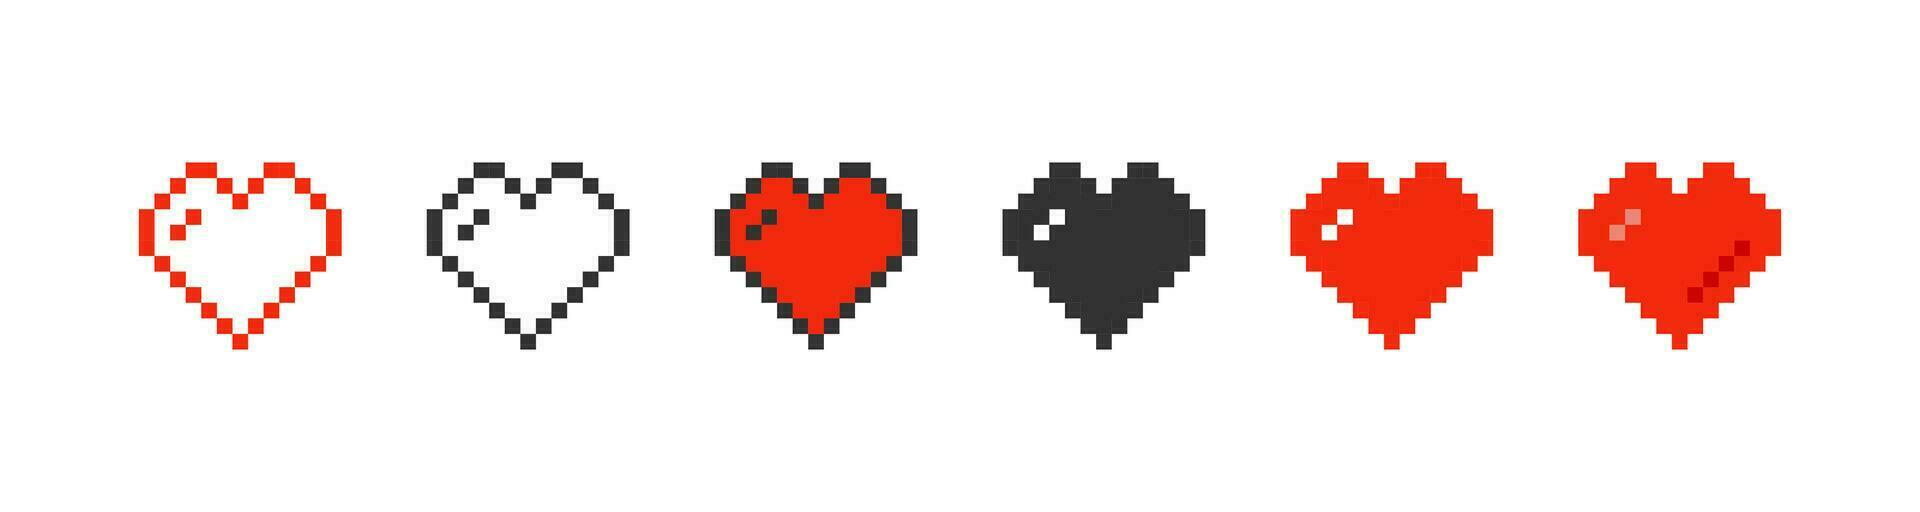 Pixelated heart in different styles icon set. Pixel game life symbol. Cute st valentine's day red heart, game element. Outline flat and colored style. Vector illustration.